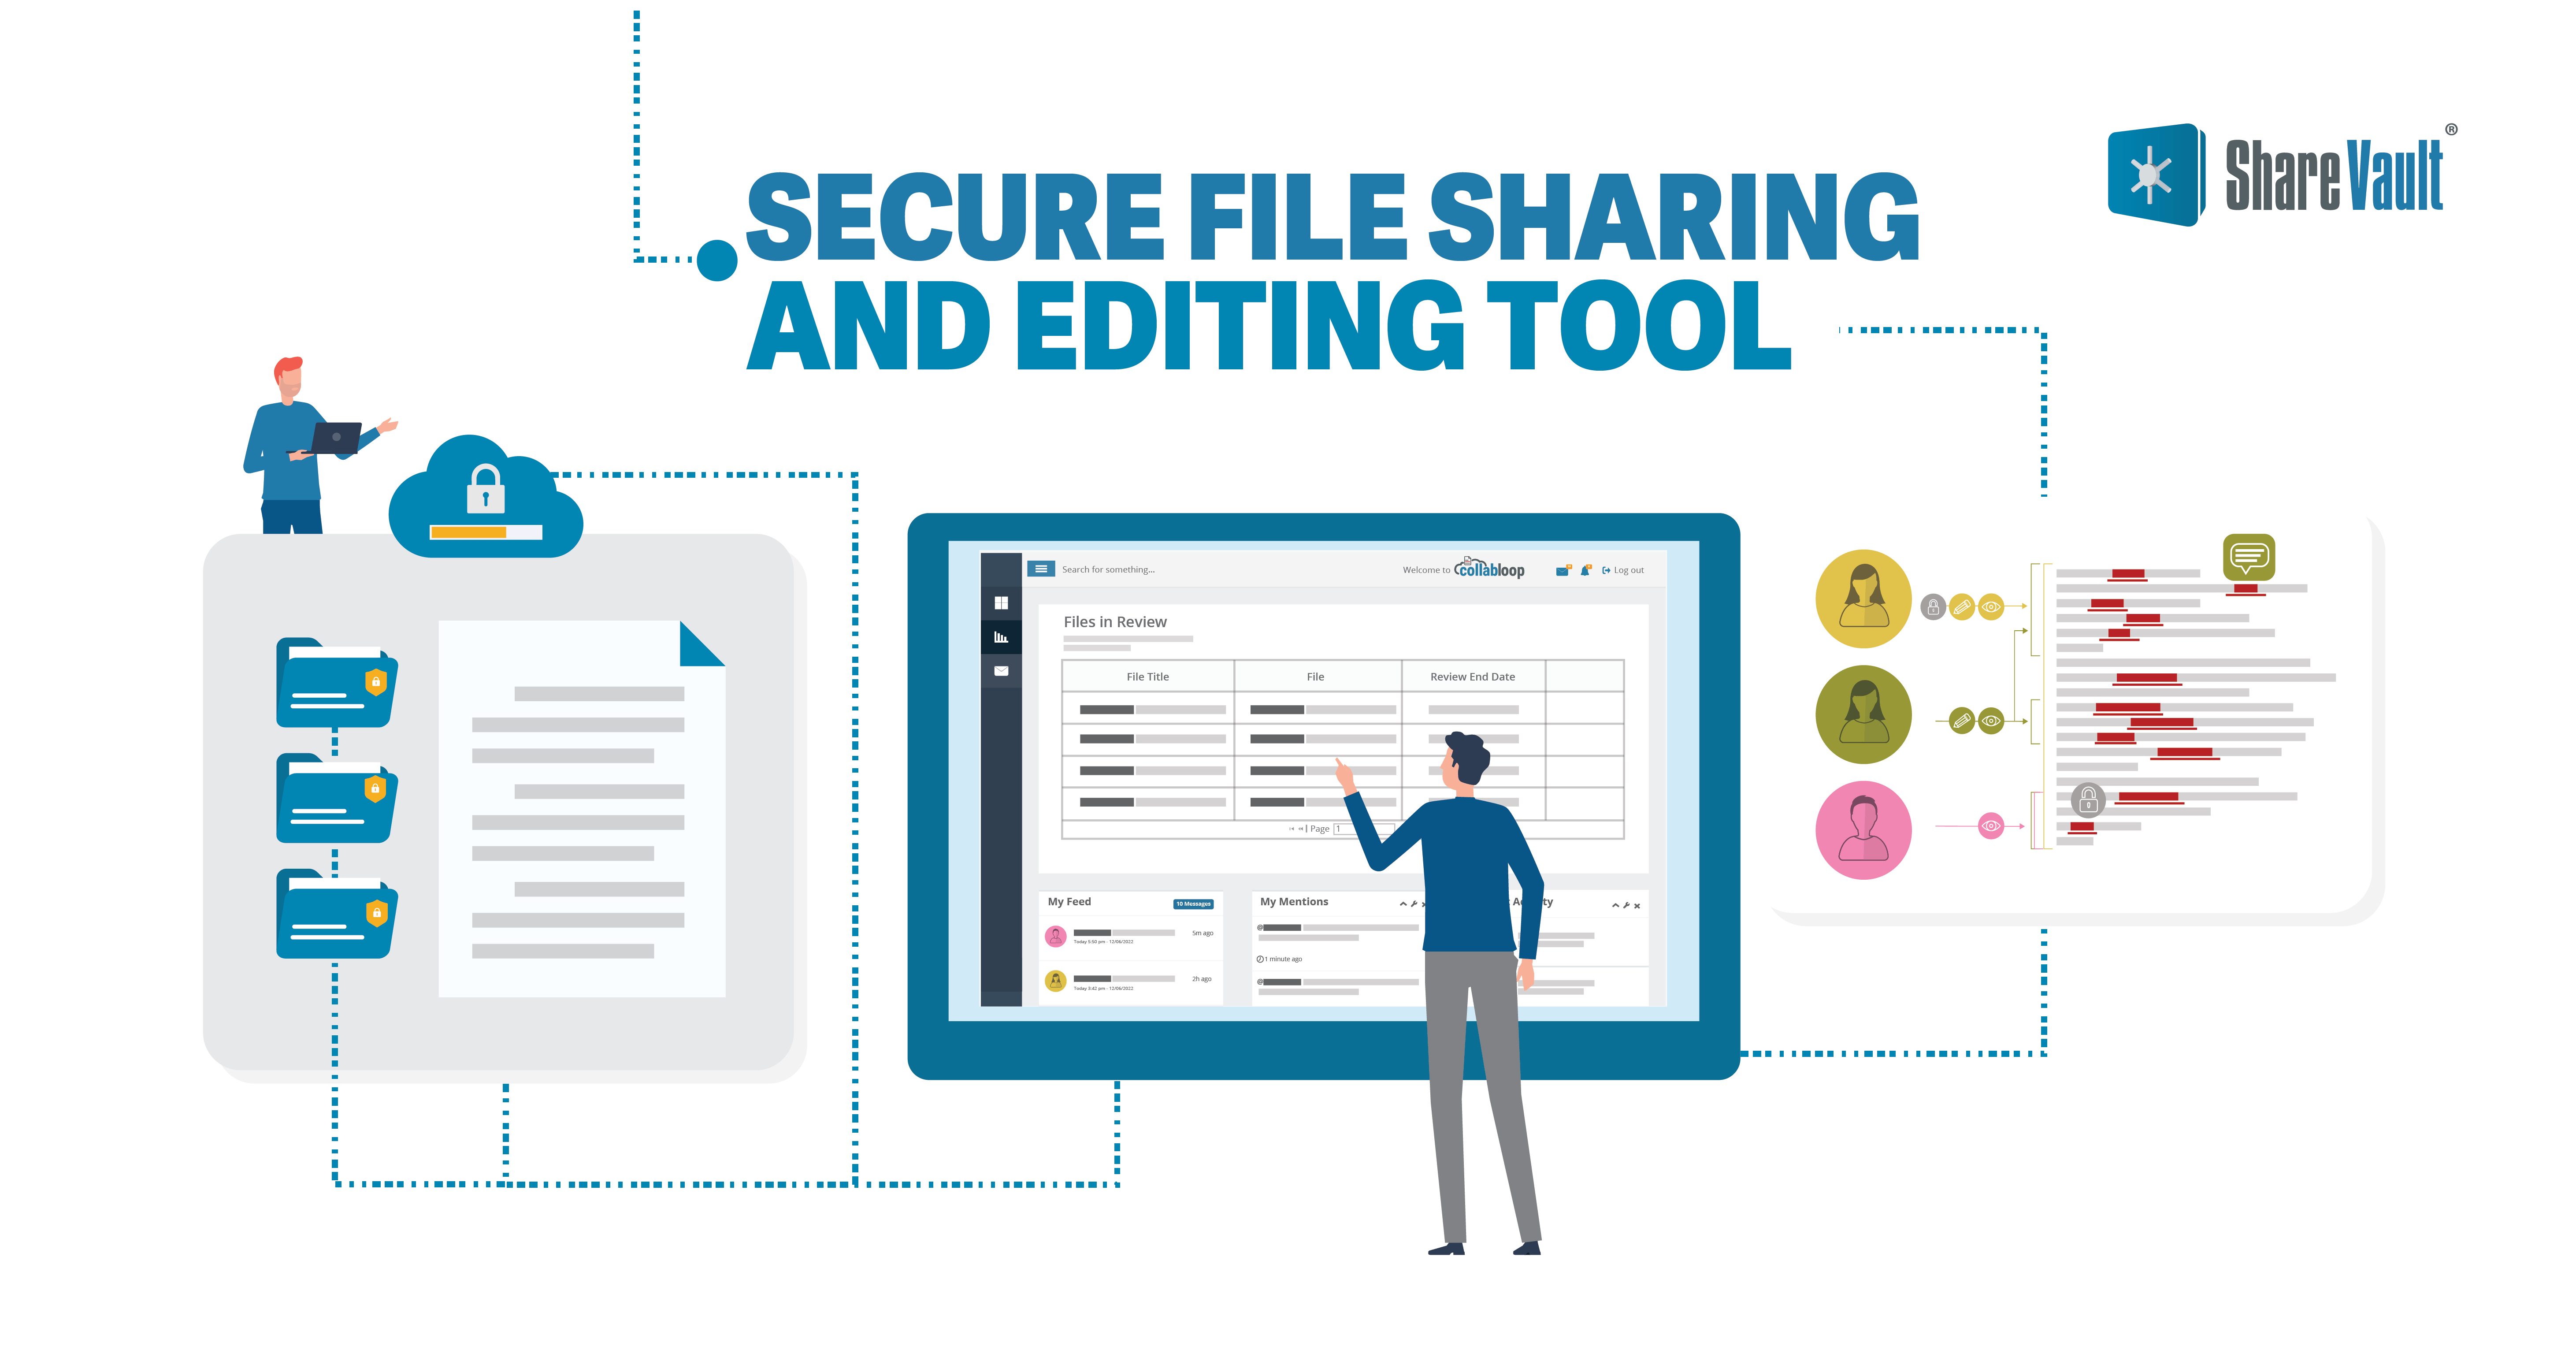 Secure file sharing and editing tool